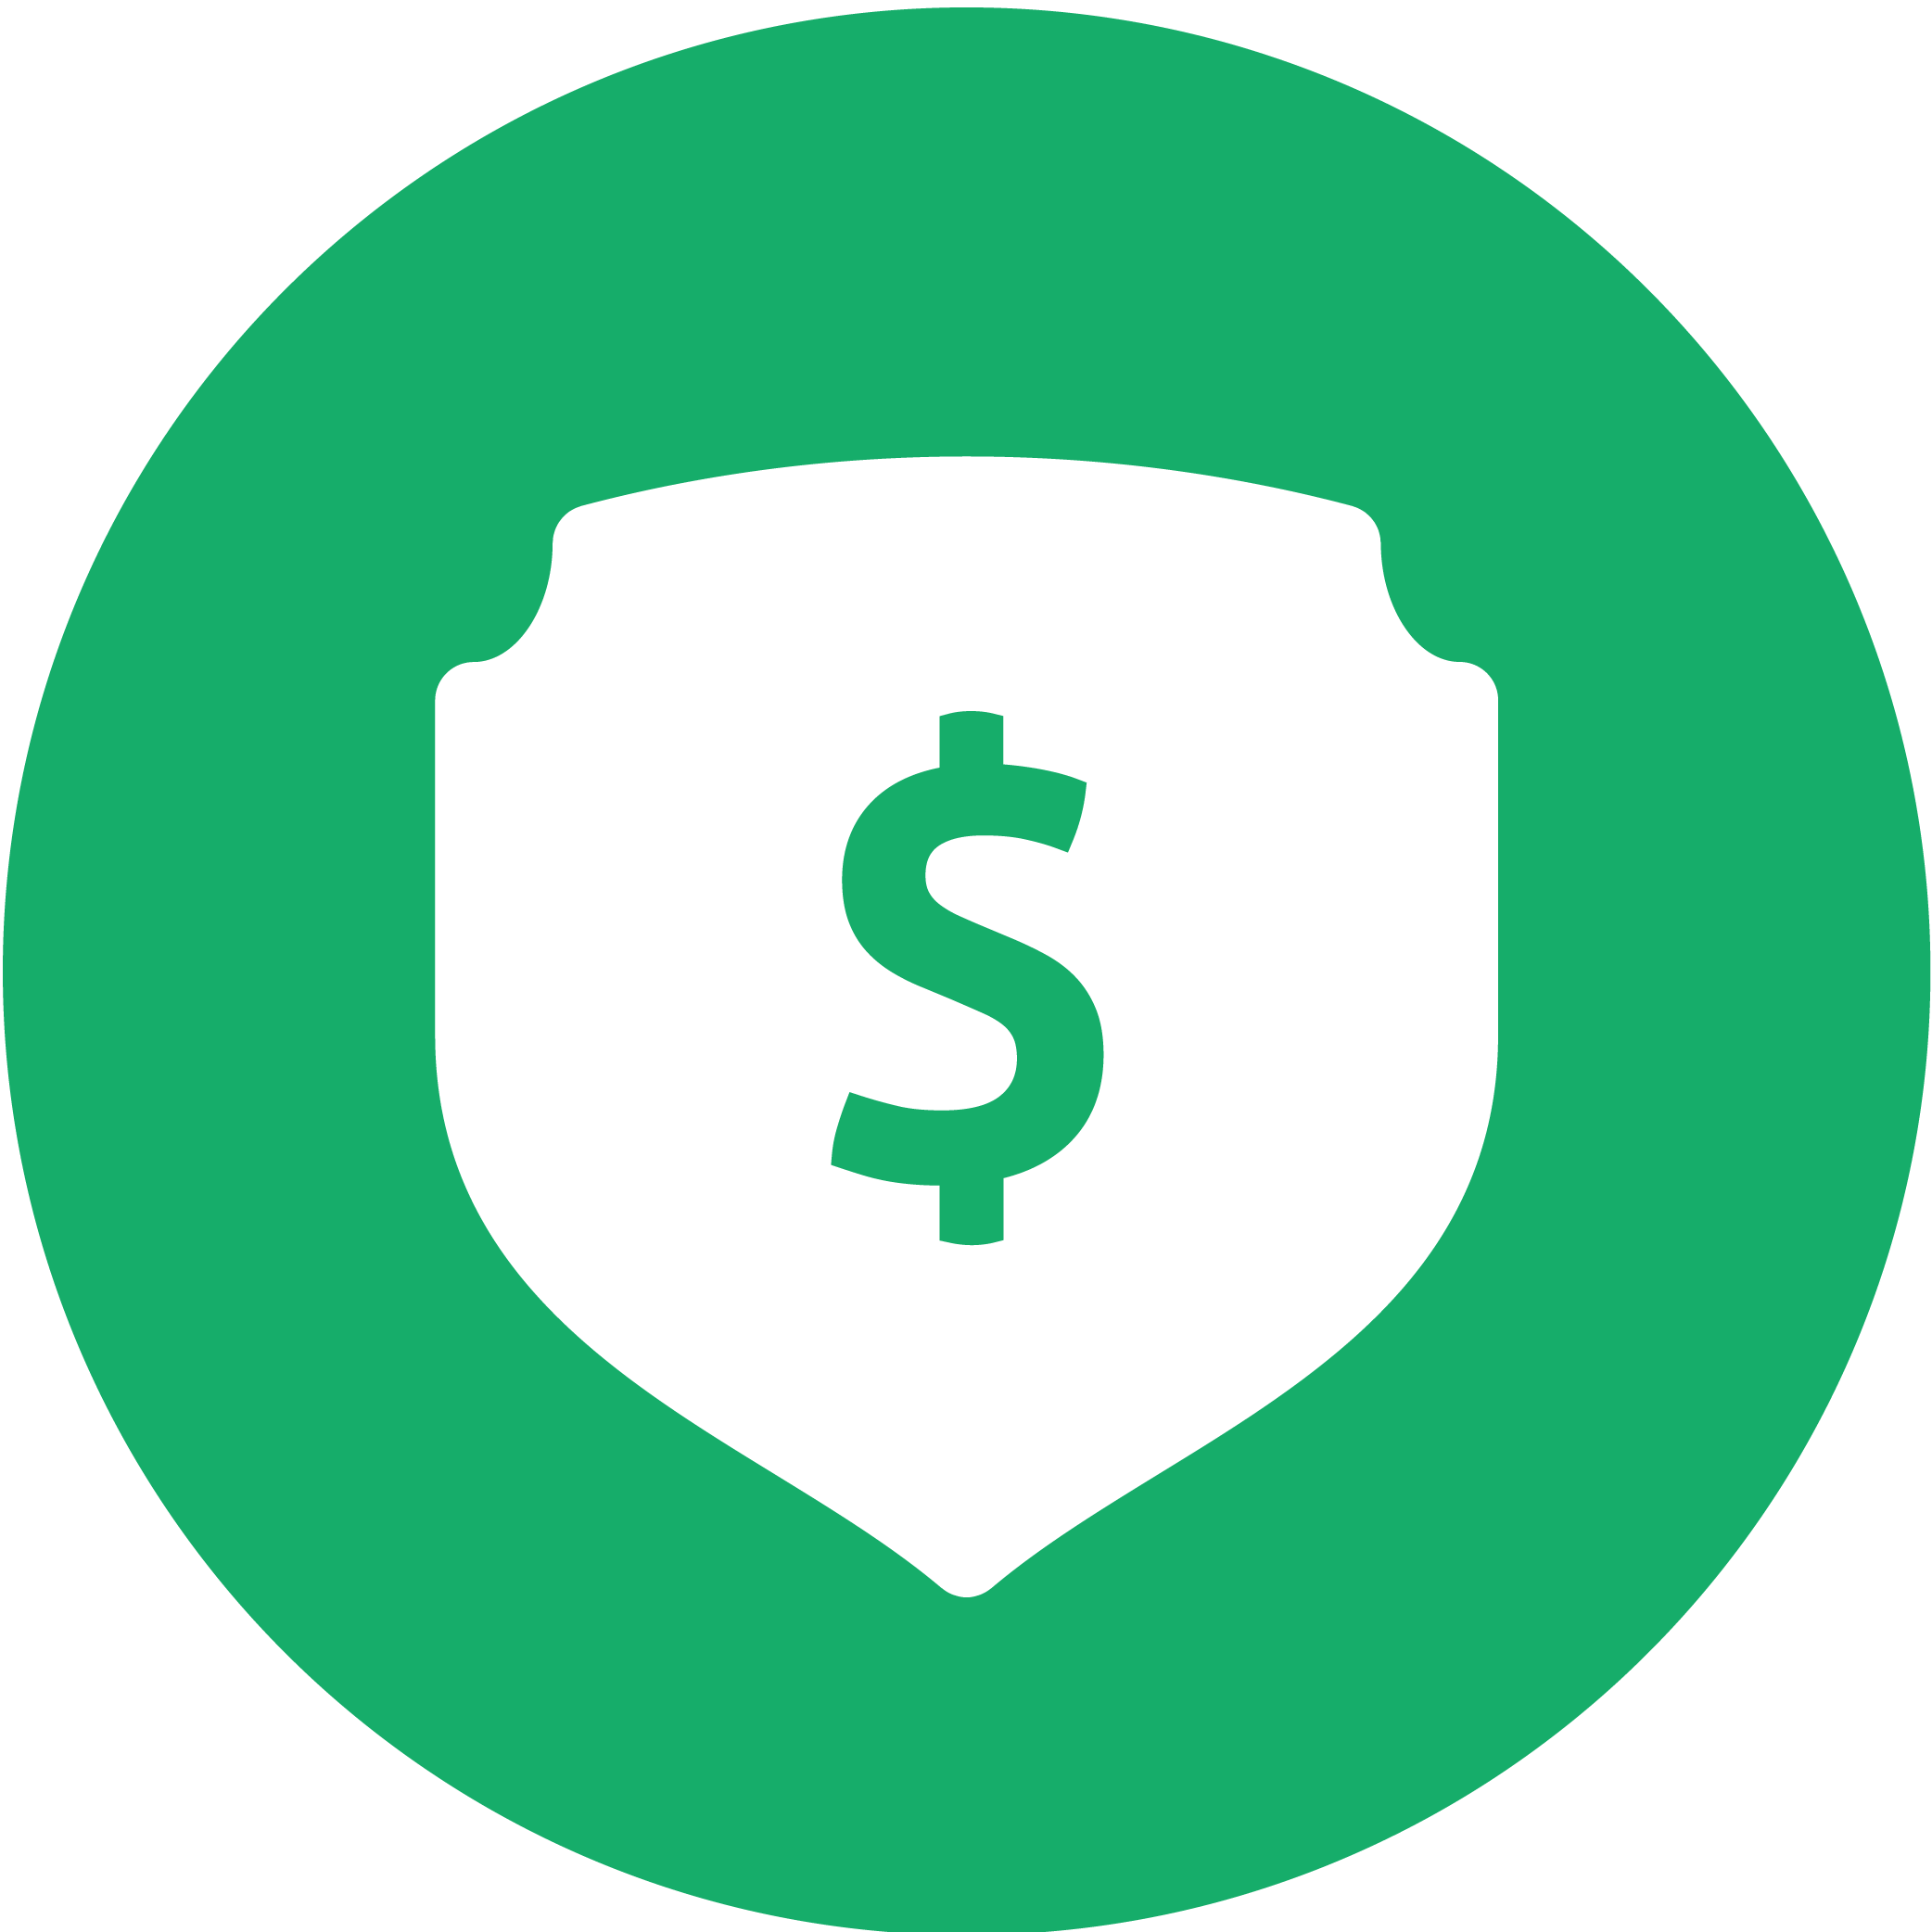 Icon of a dollar sign on a green background